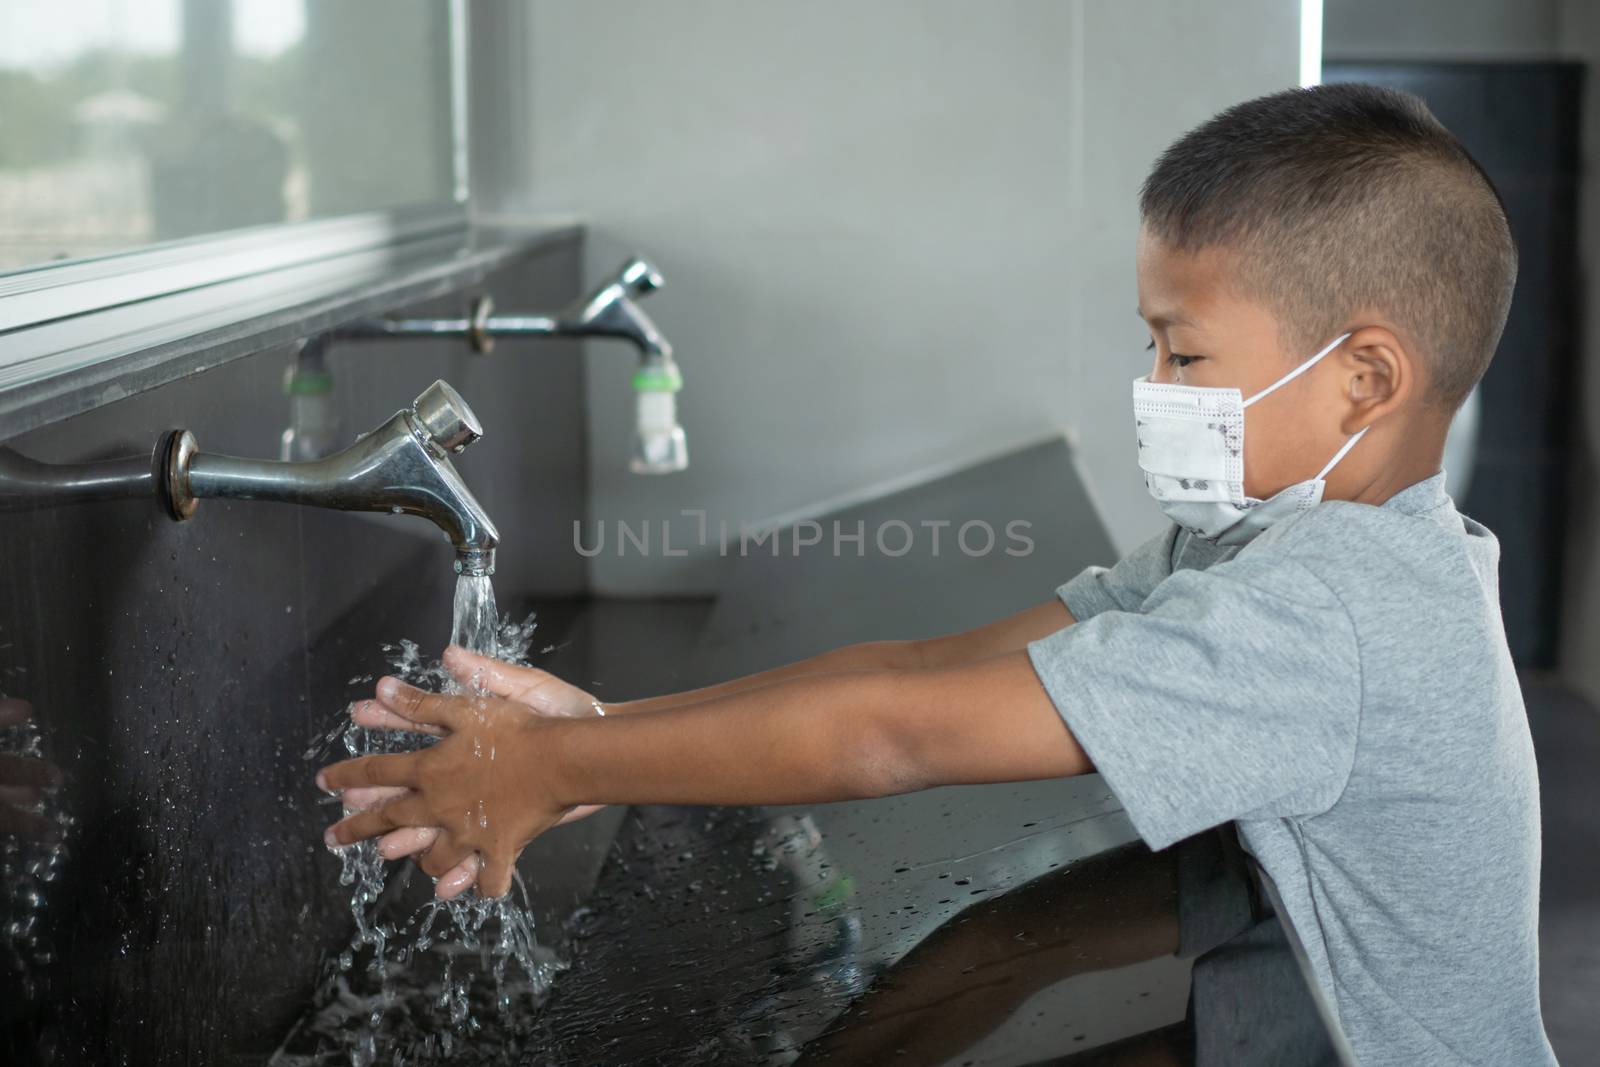 Boy wearing a mask Washing hands in public toilets by Unimages2527